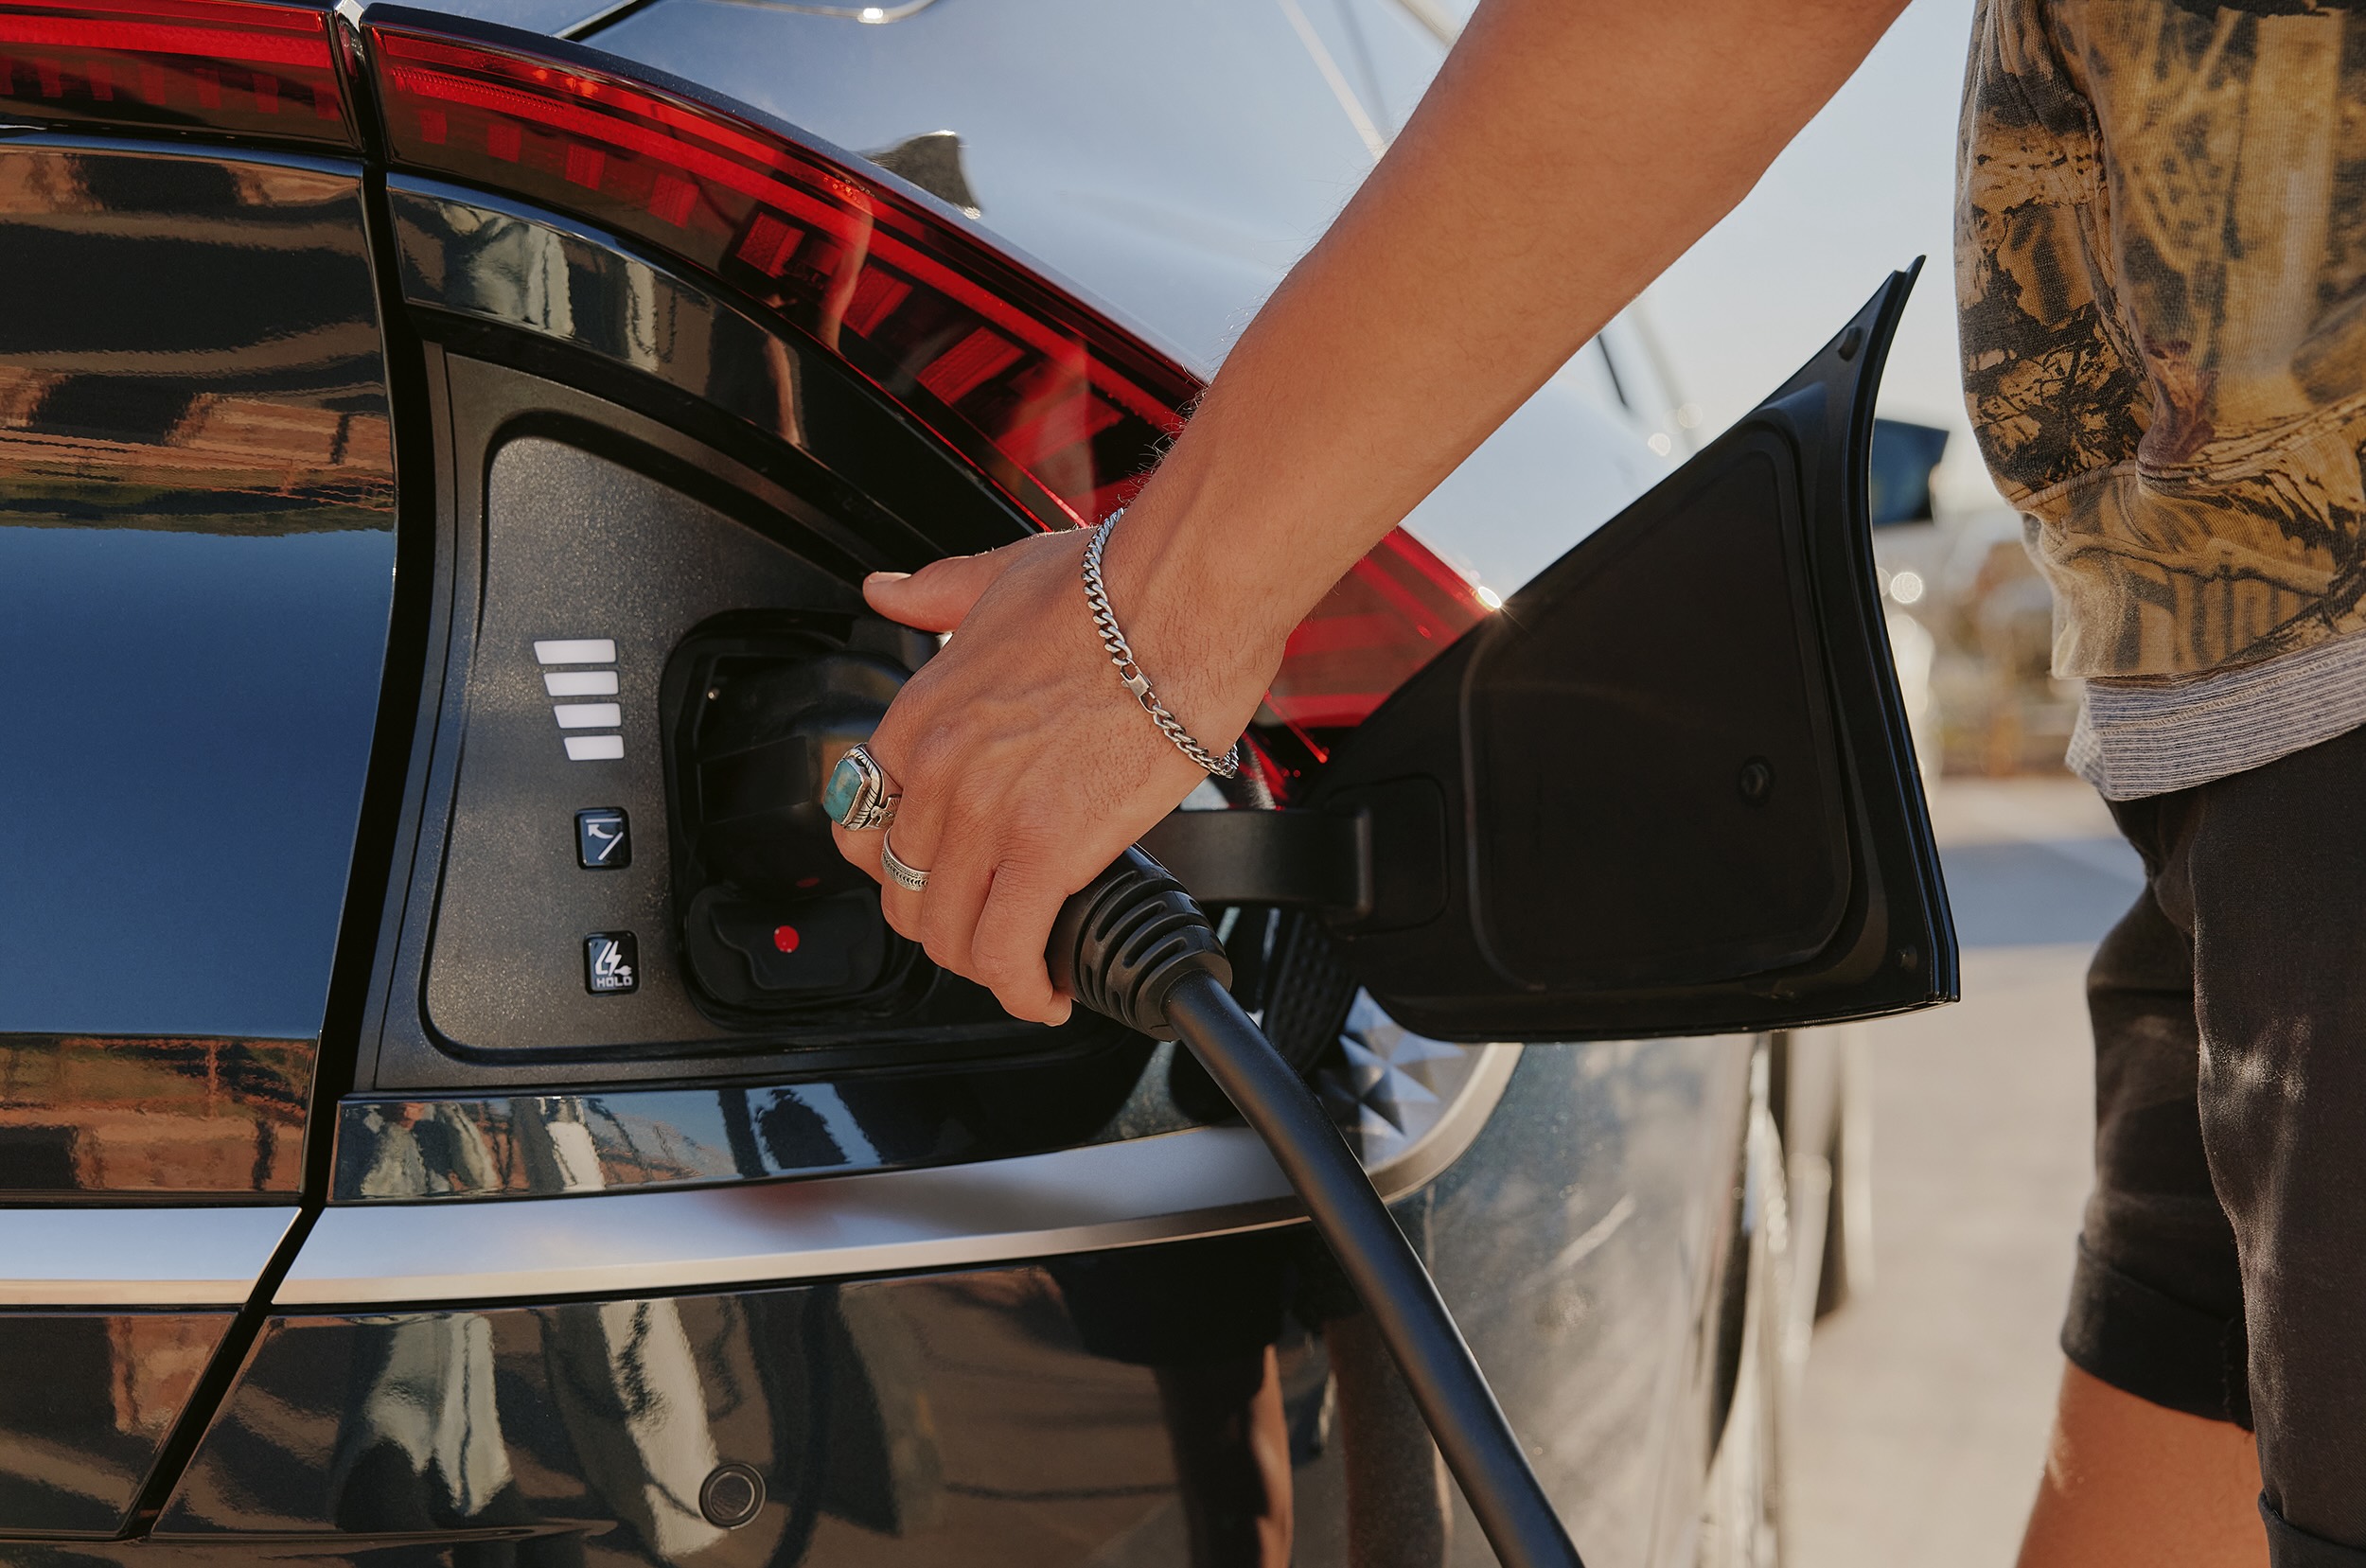 A person's hand plugs a charger into an electric vehicle.